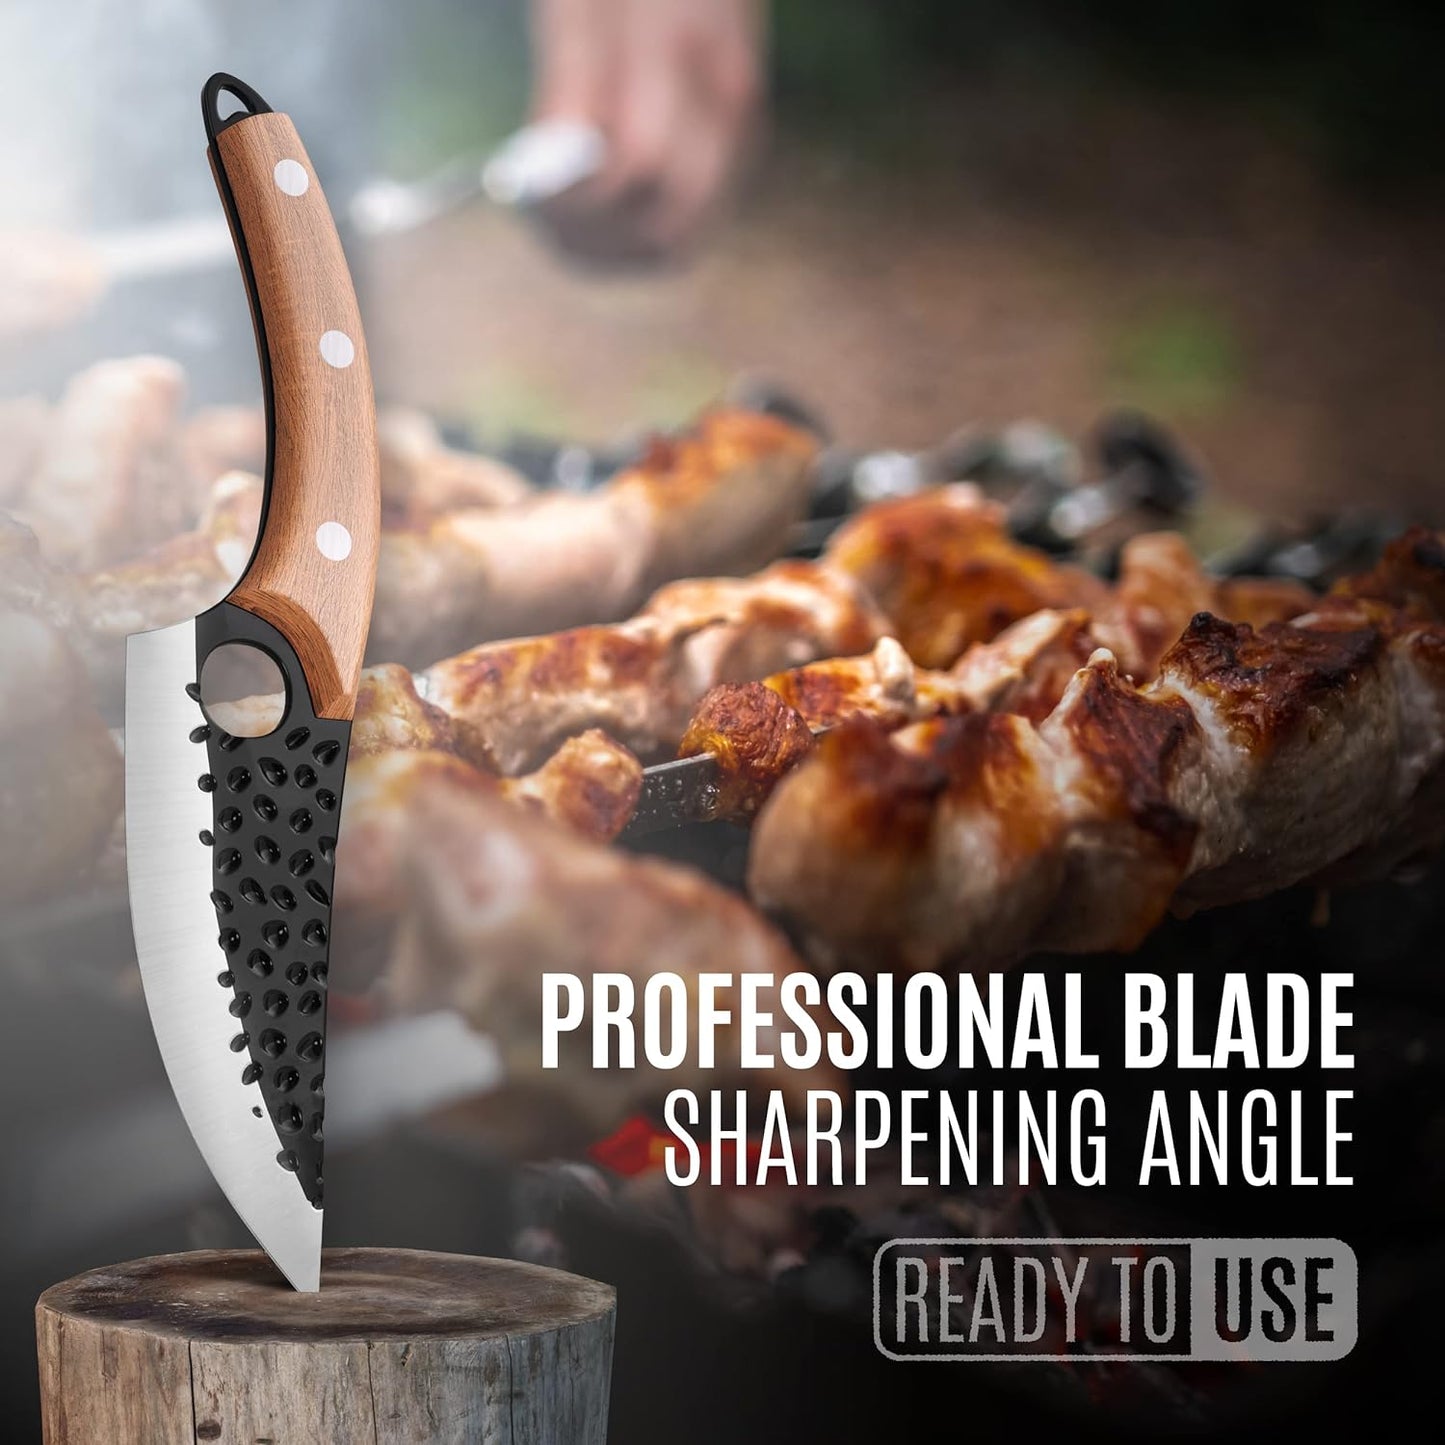 Boning Knife 110% Hand Forged Butcher Knife Camping Knife, Cleaver for Easy Cutting, Chopping, Deboning, fileting, BBQ – Outdoor and Kitchen Meat Cutting Knife_6